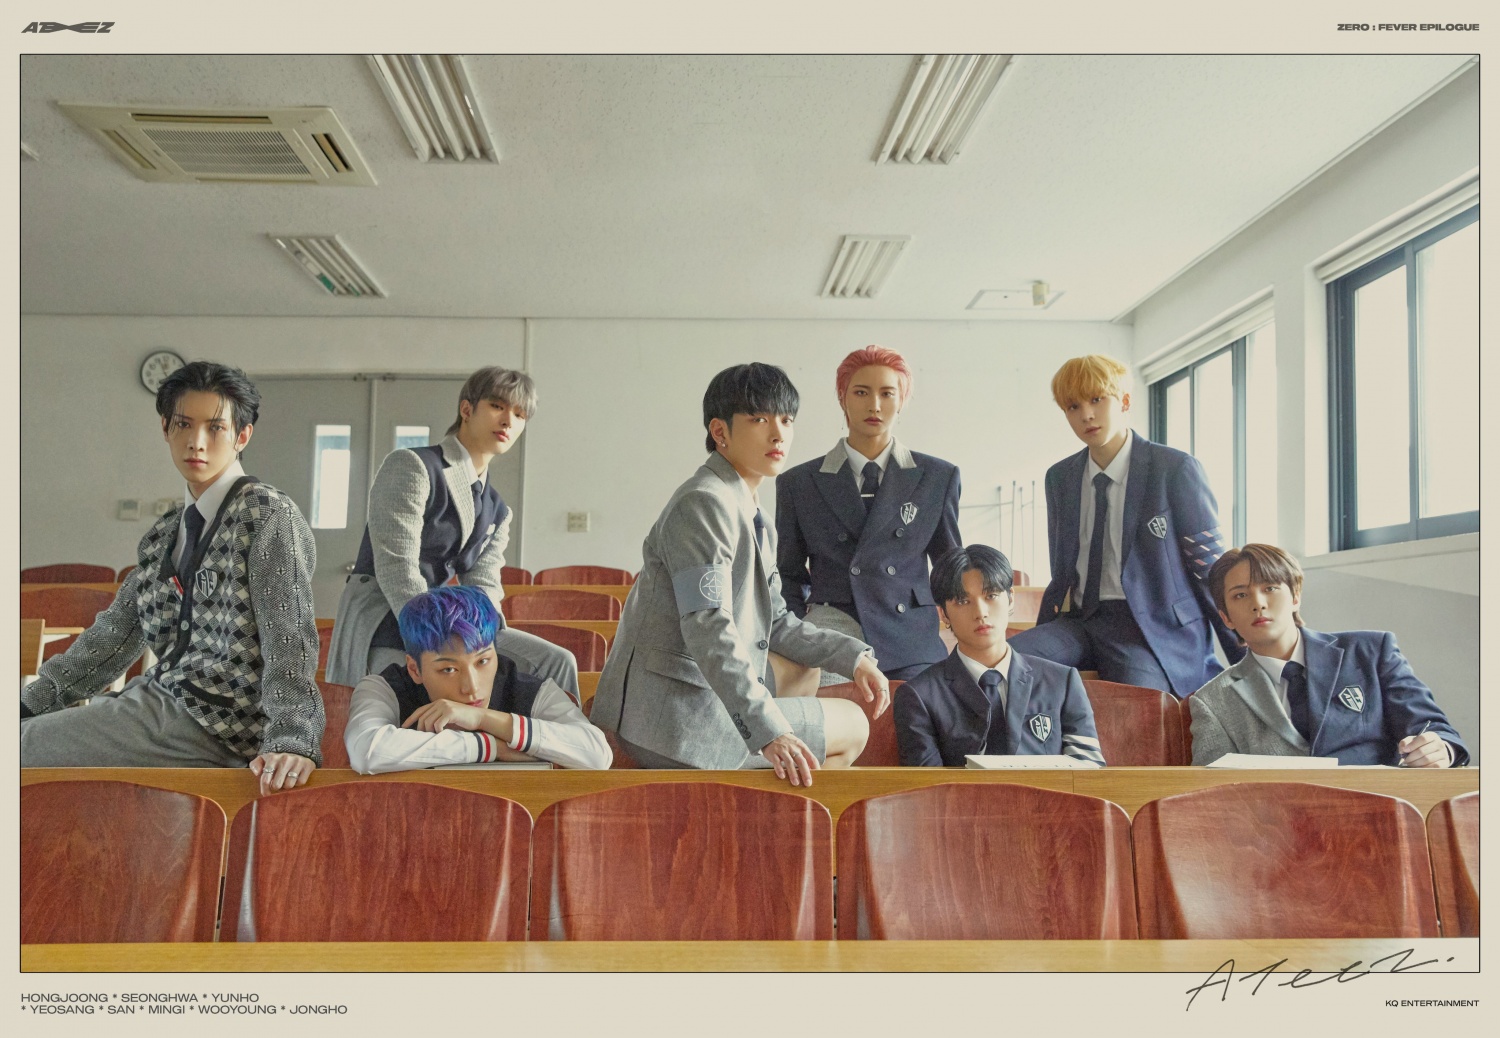 ATEEZ 'Turbulence' group concept photo released... school uniform styling